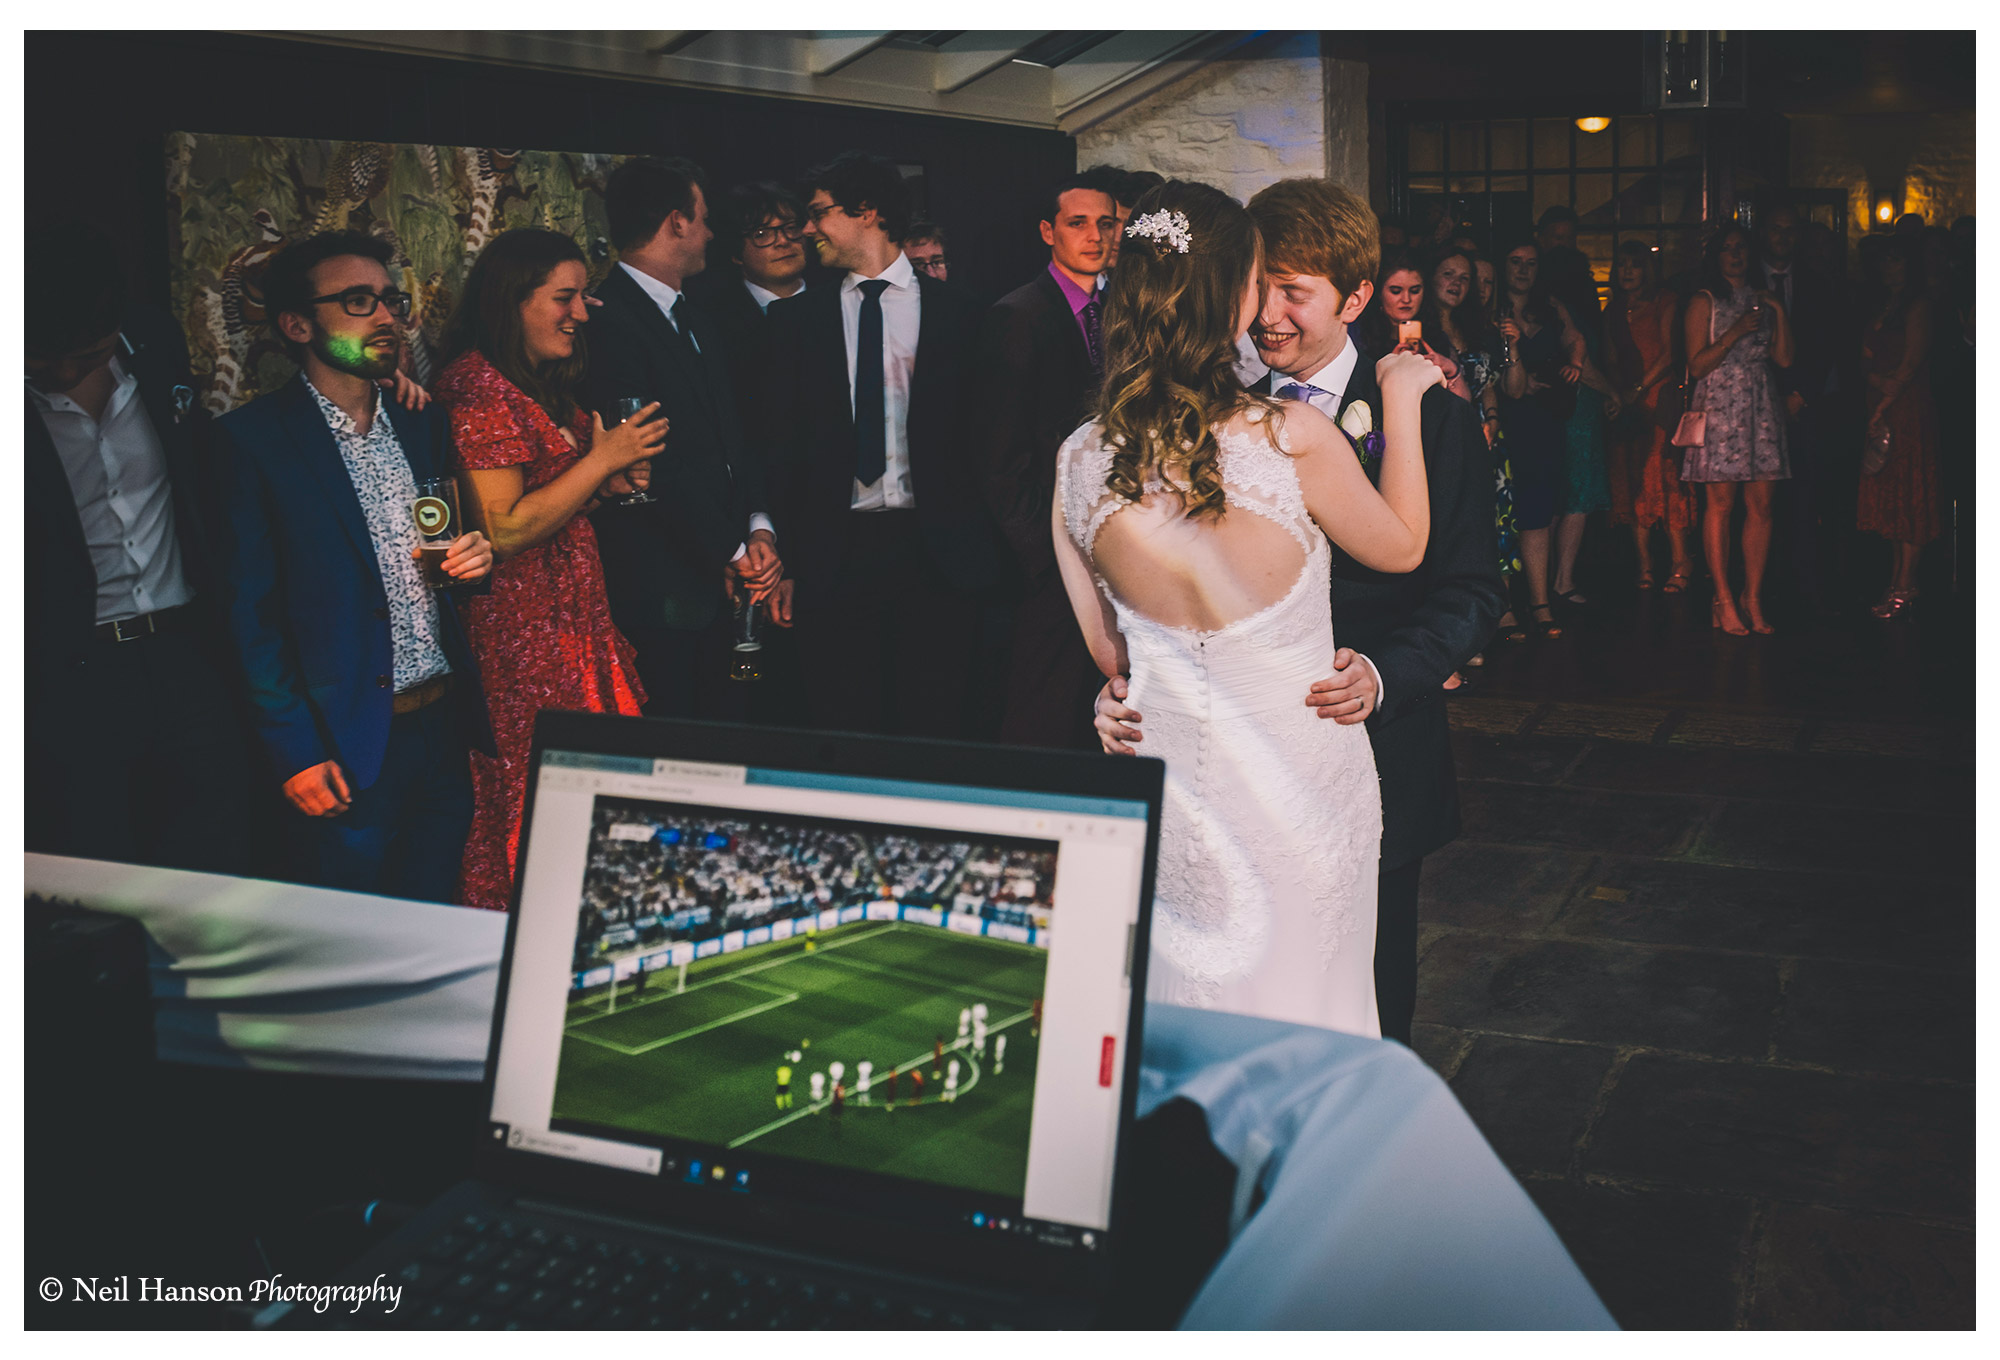 Watching the champions league final during the first dance